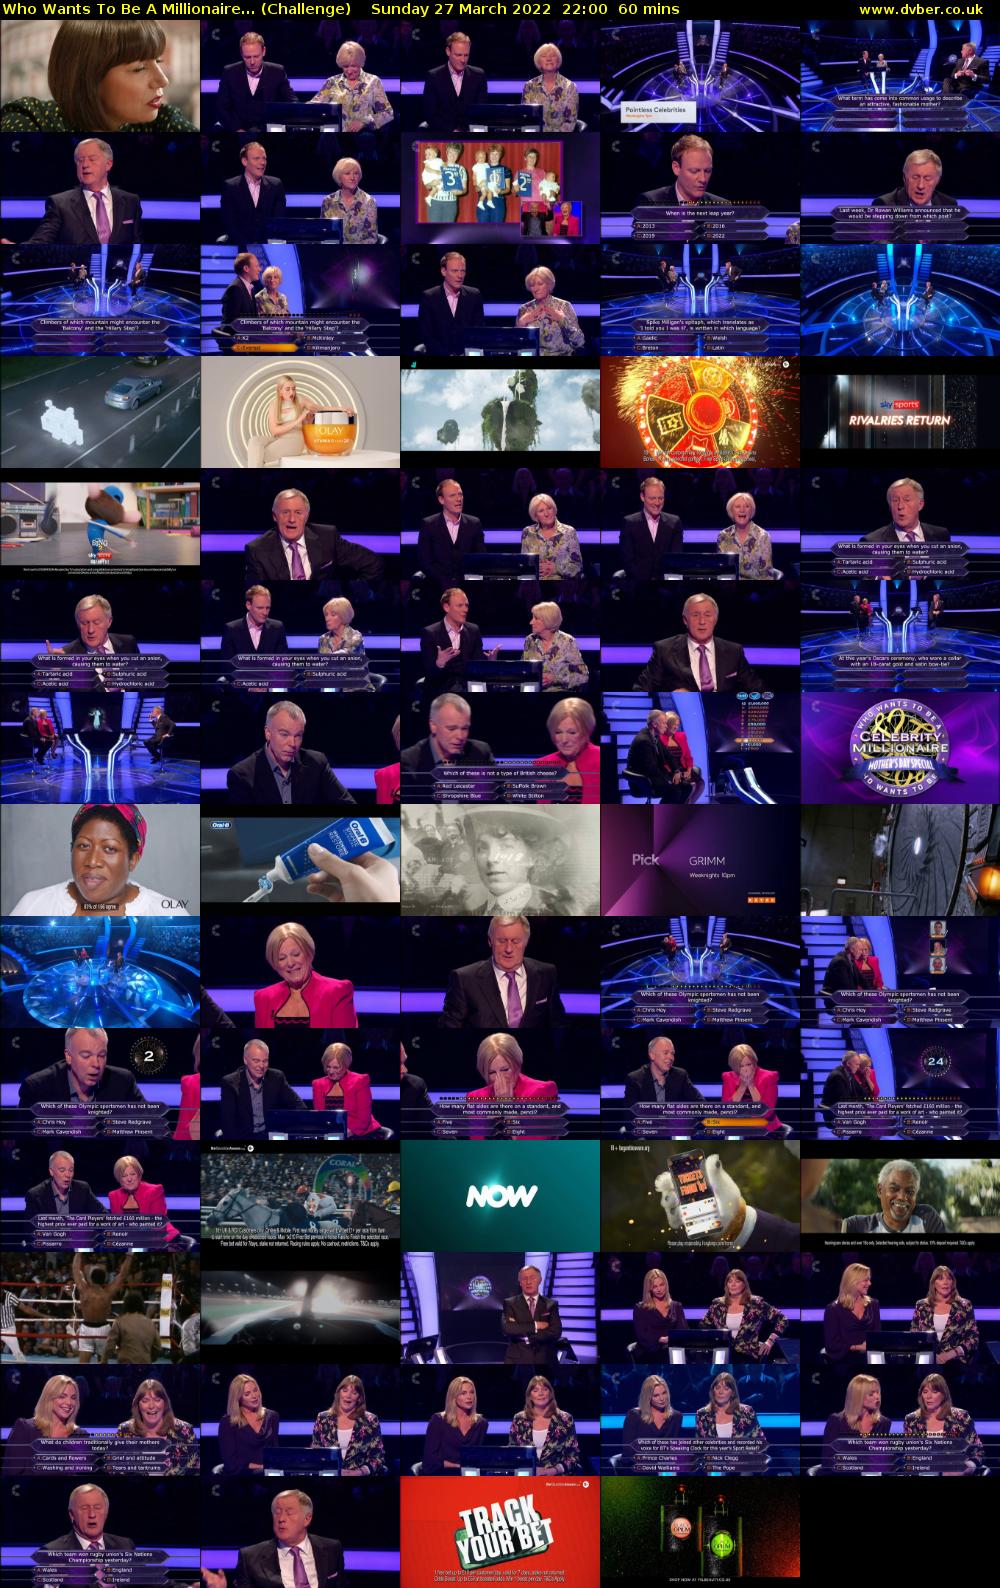 Who Wants To Be A Millionaire... (Challenge) Sunday 27 March 2022 22:00 - 23:00